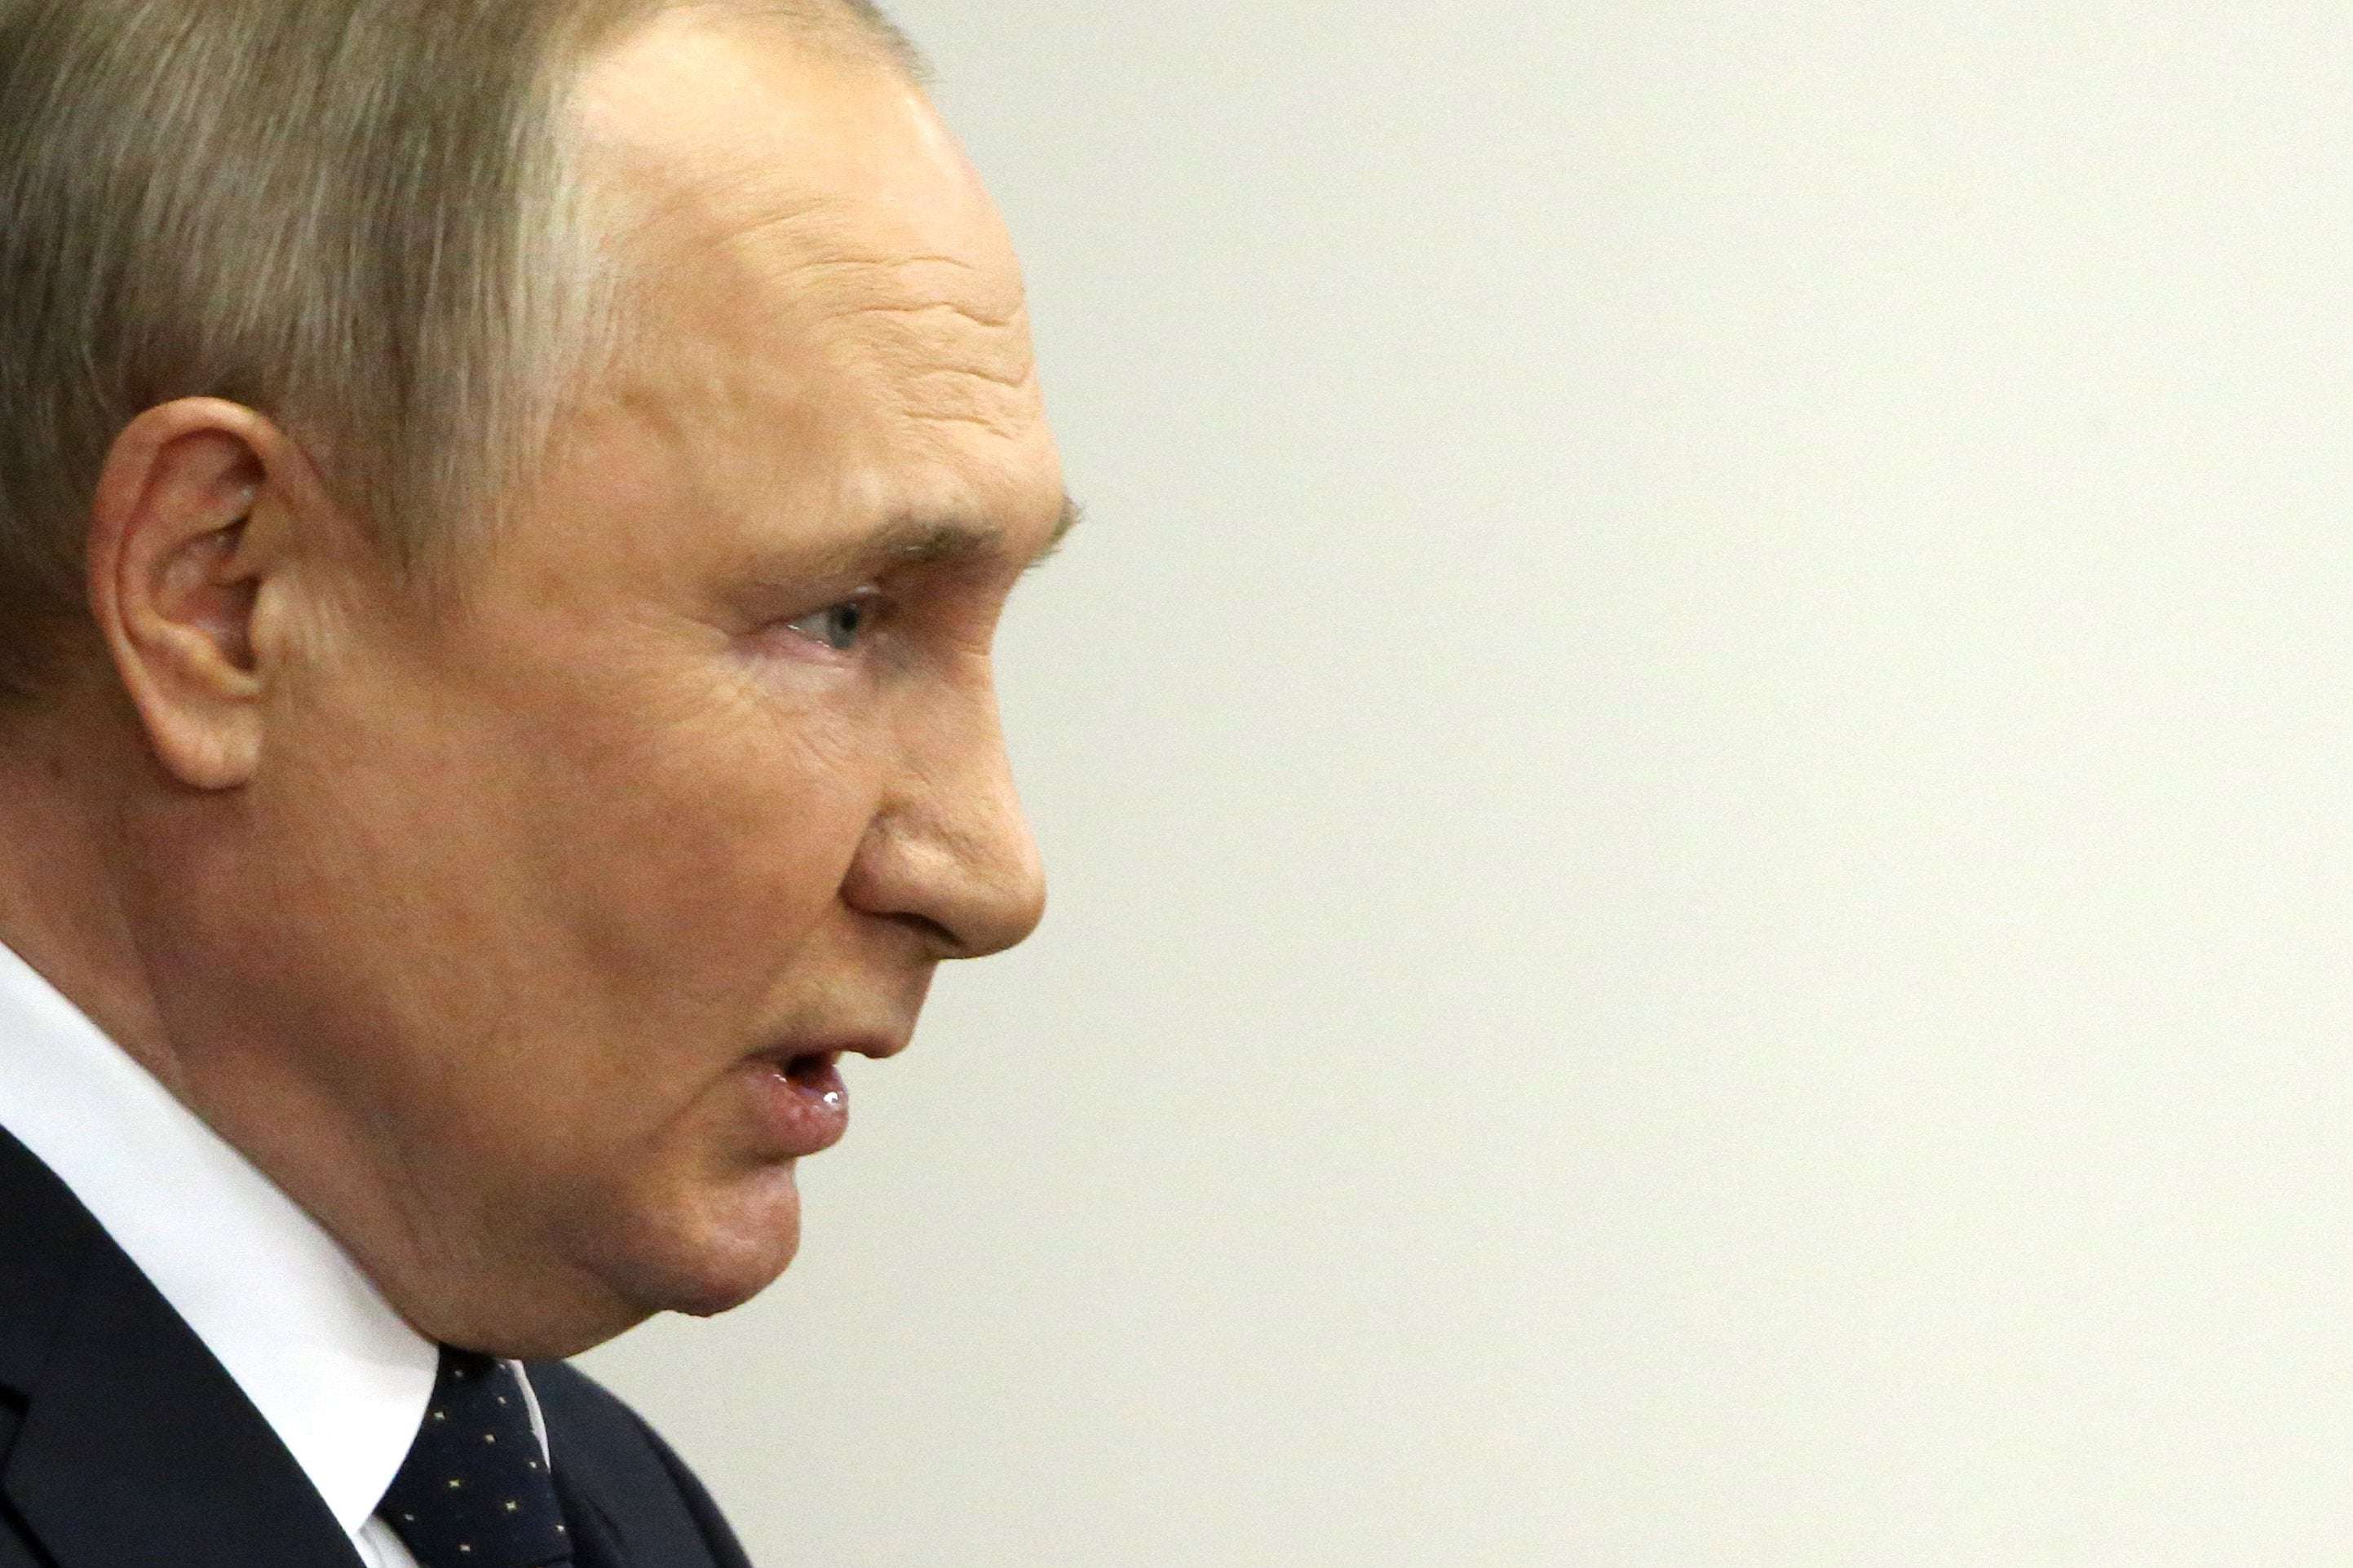 image for Exclusive: Putin Treated for Cancer in April, U.S. Intelligence Report Says